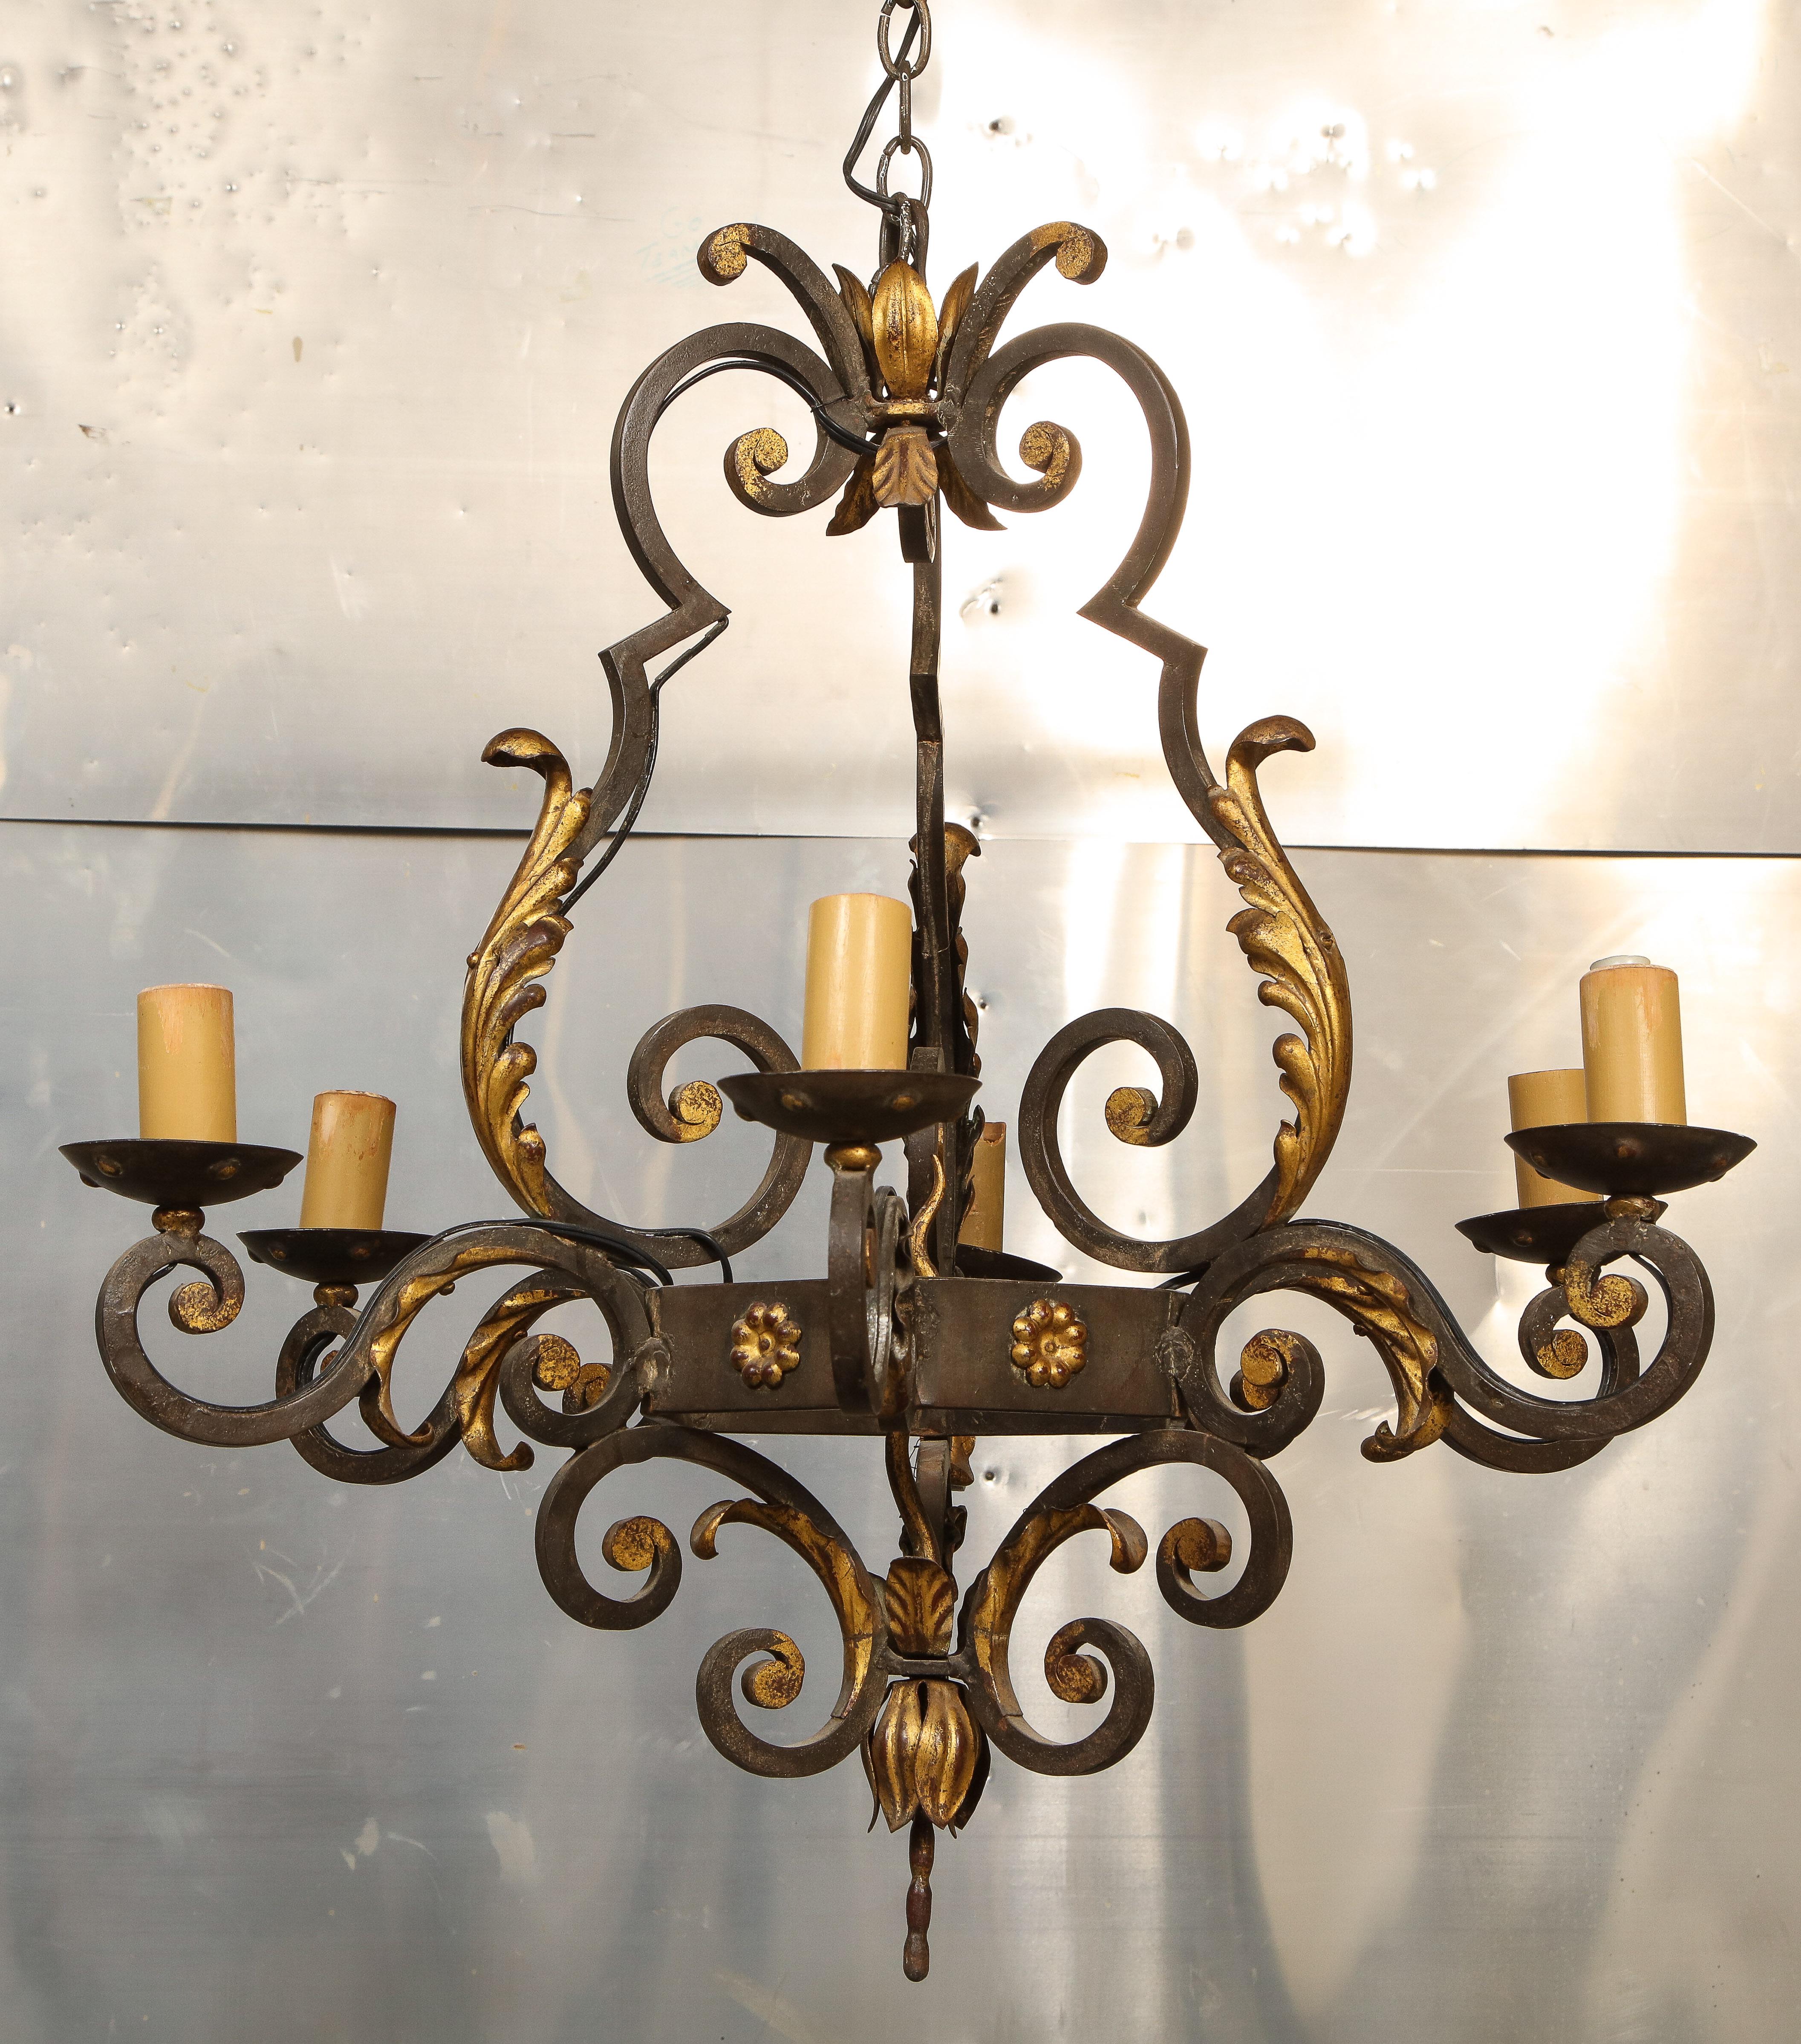 1940s French Classical Modern Gilt-Iron Six-Arm Chandelier For Sale 3